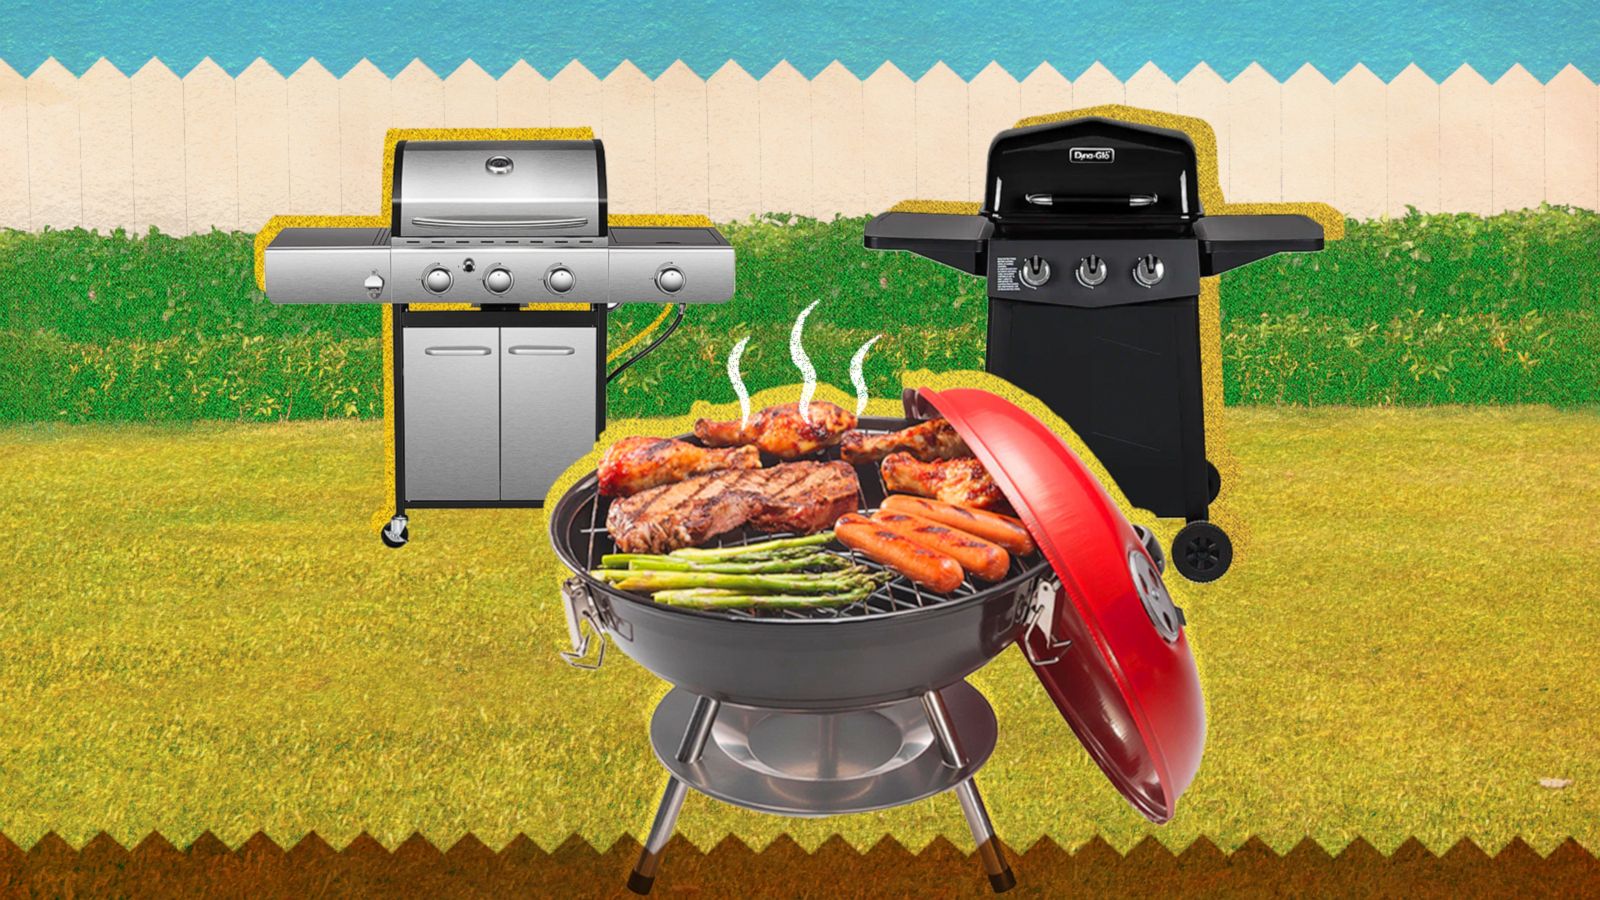 Shop charcoal grills and more for your next spring or summer